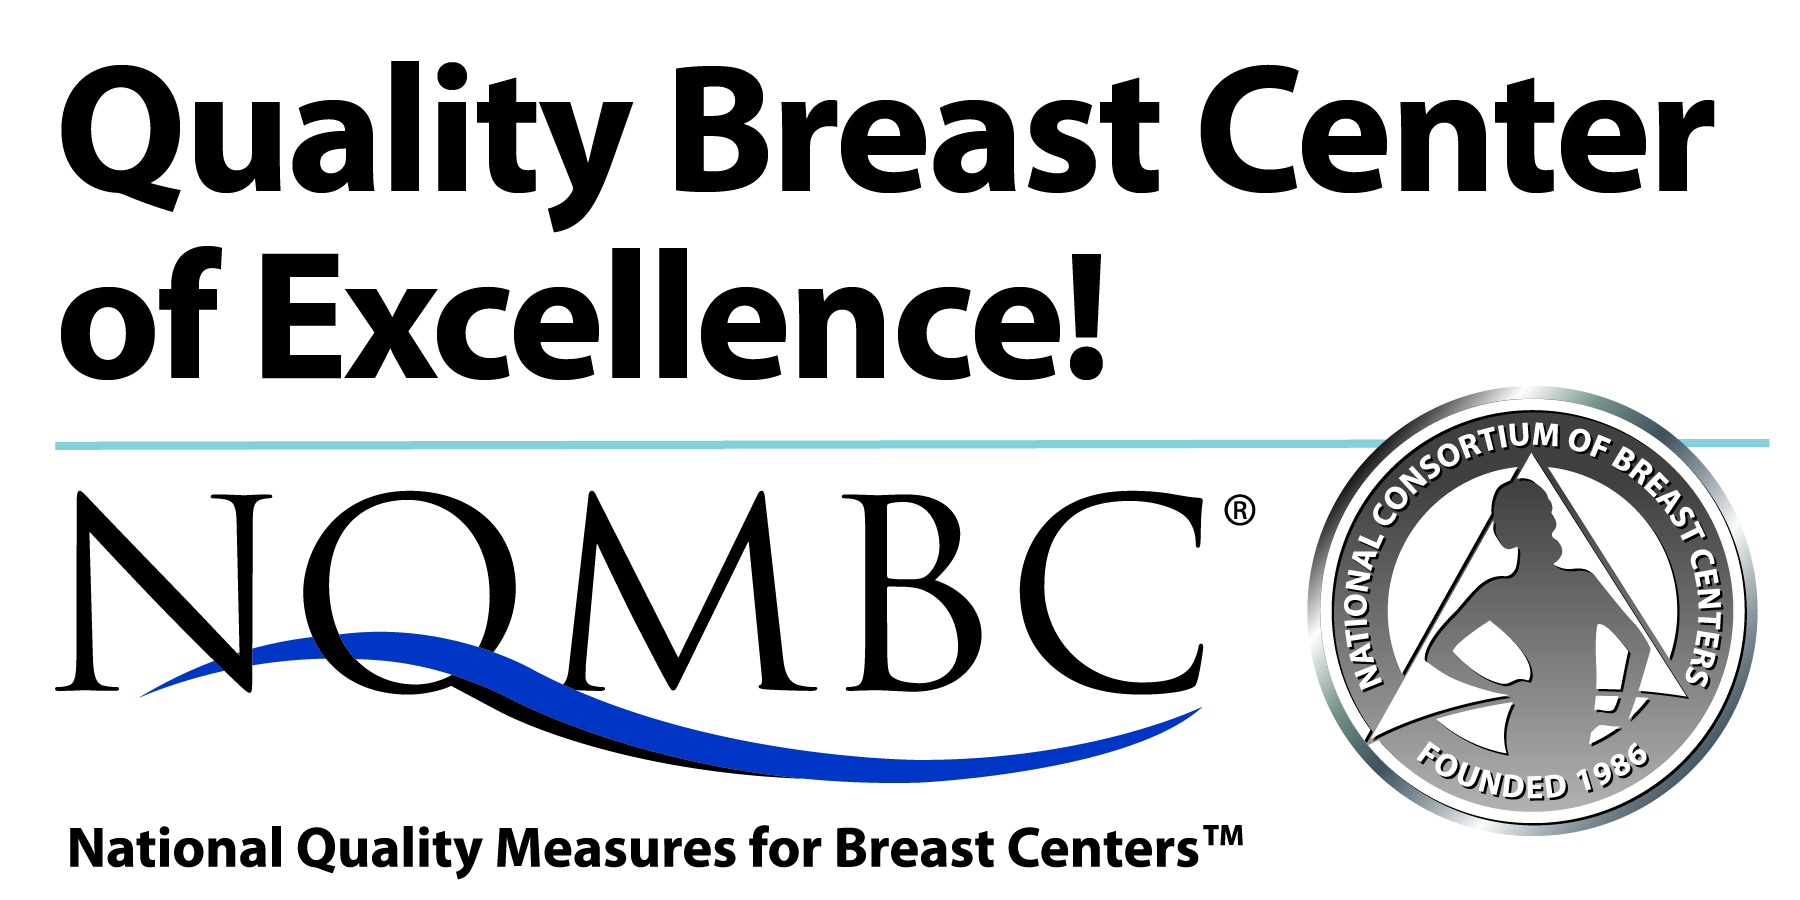 National Quality Measures for Breast Centers